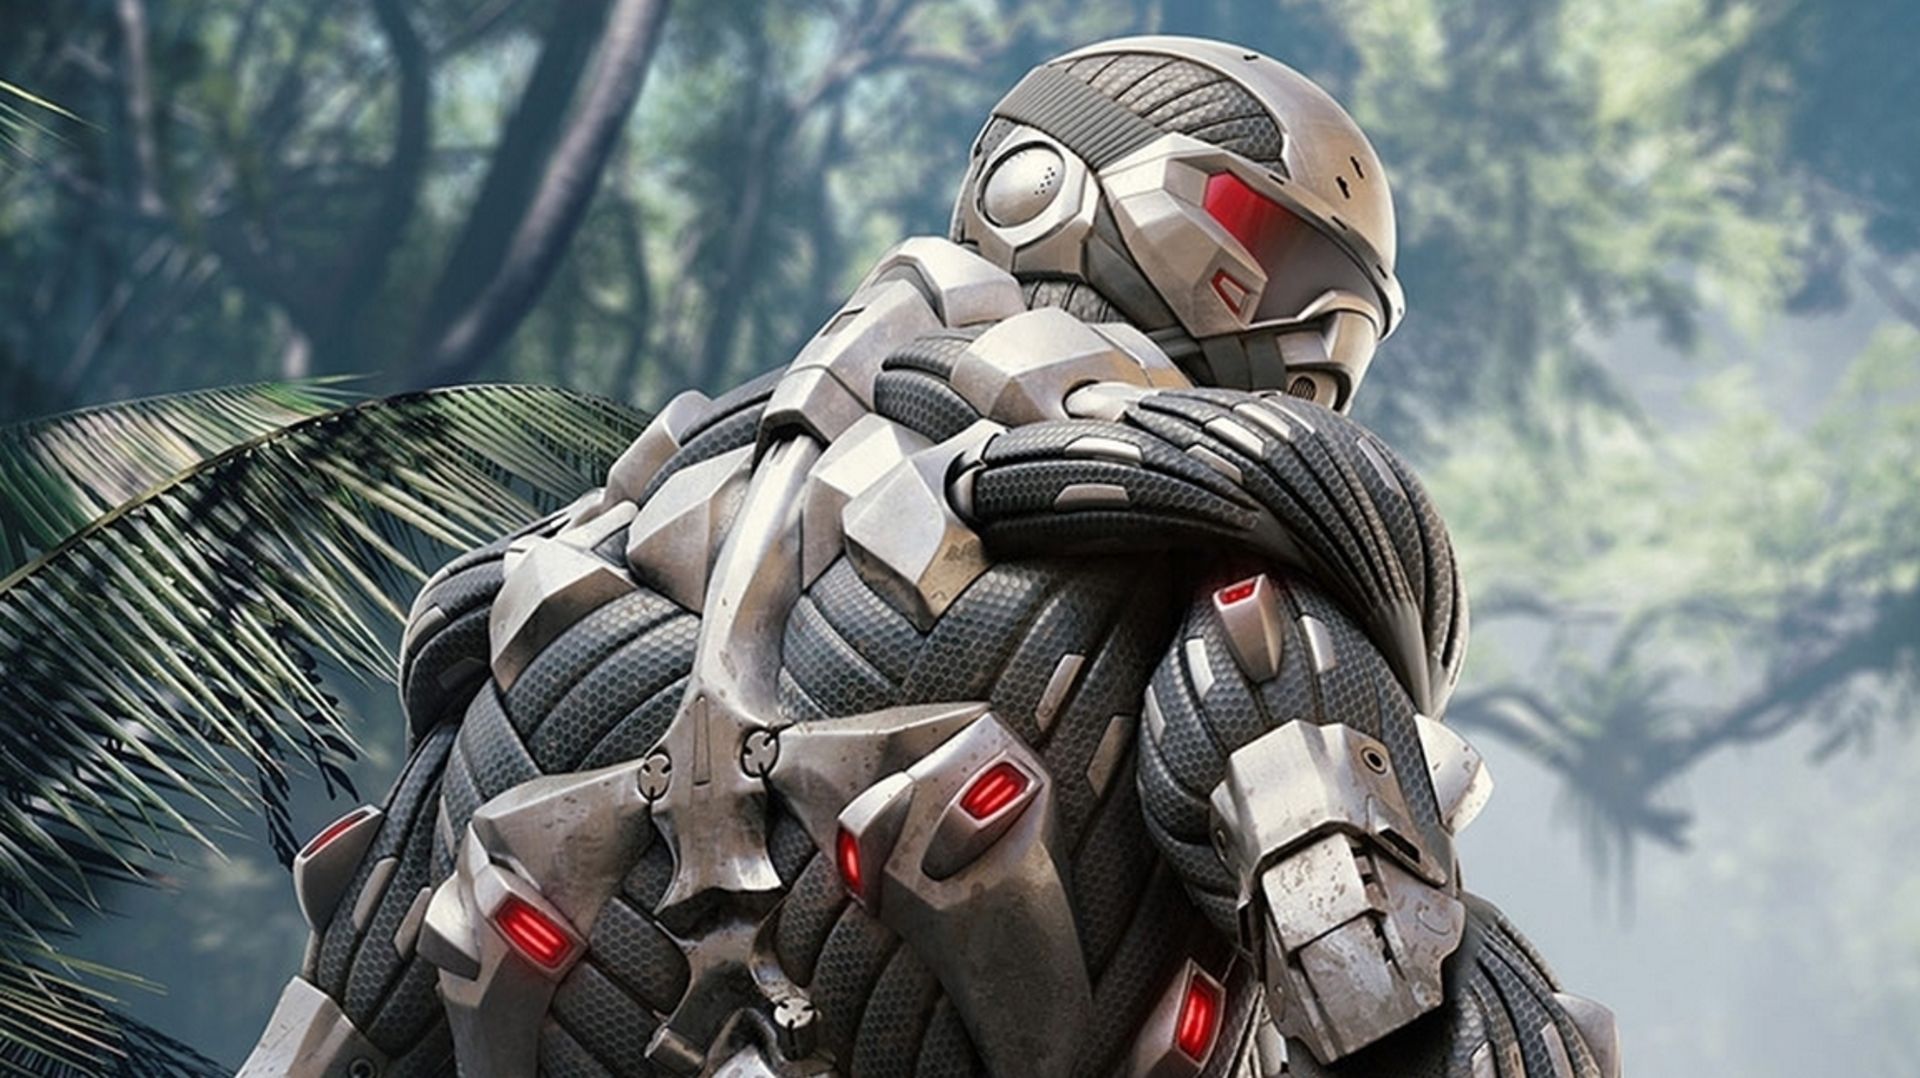 Crysis Remastered on Switch: yes, a handheld really can run Crysis • Eurogamer.net